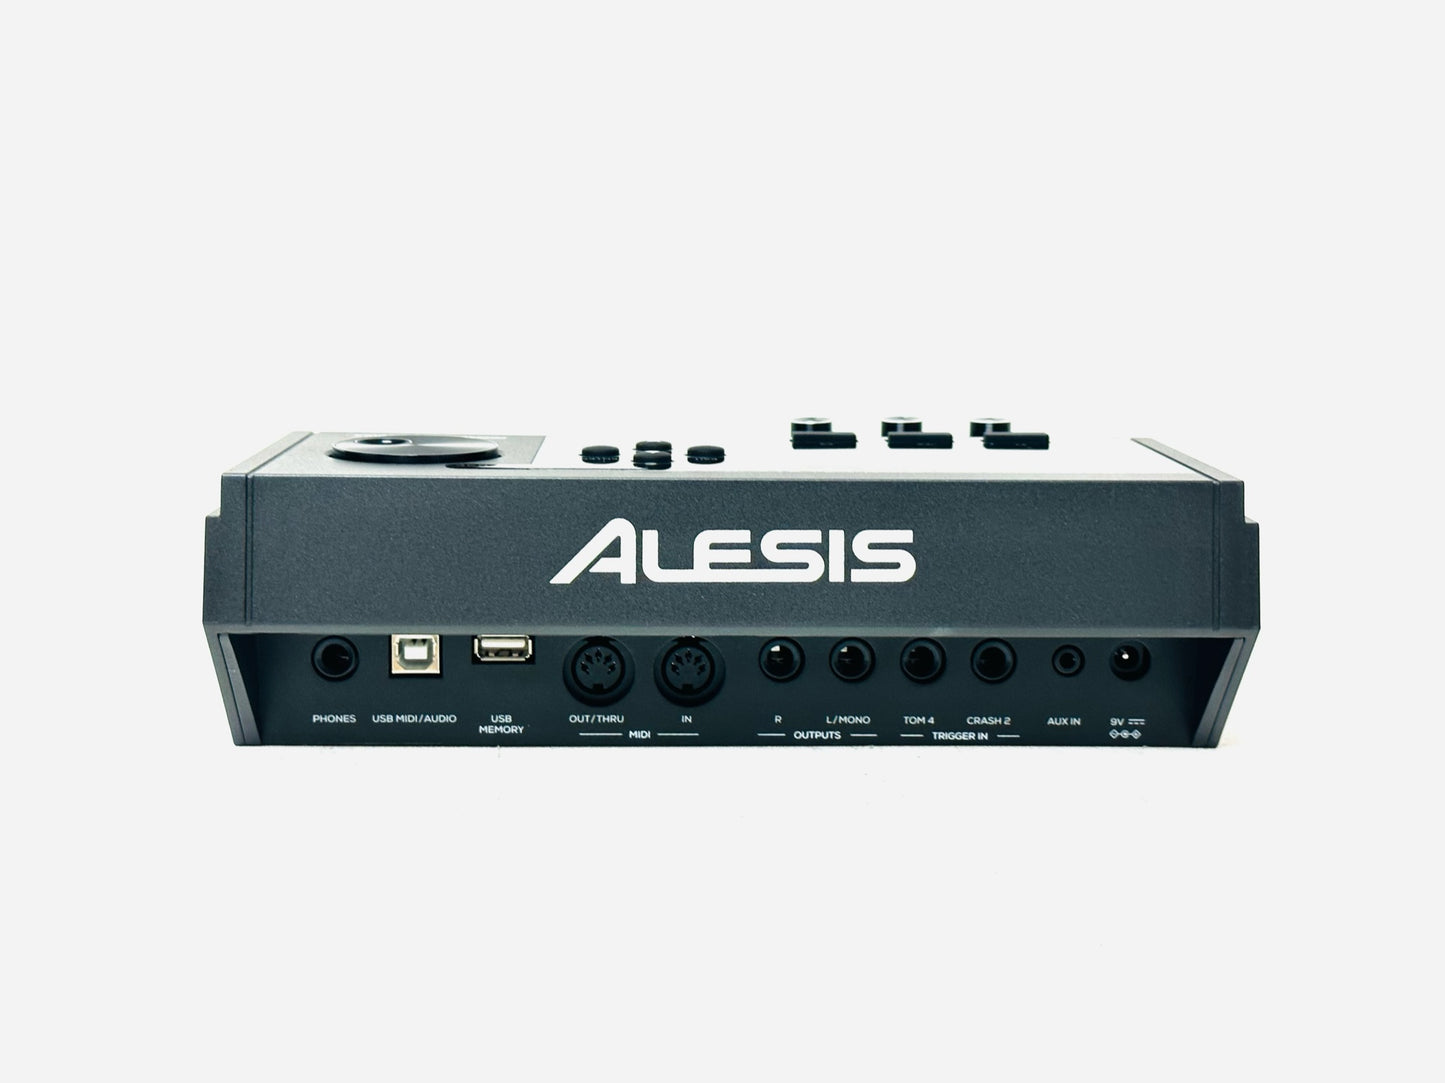 Alesis DM10 MKII Pro Drum Module Brain with Cables OPEN BOX